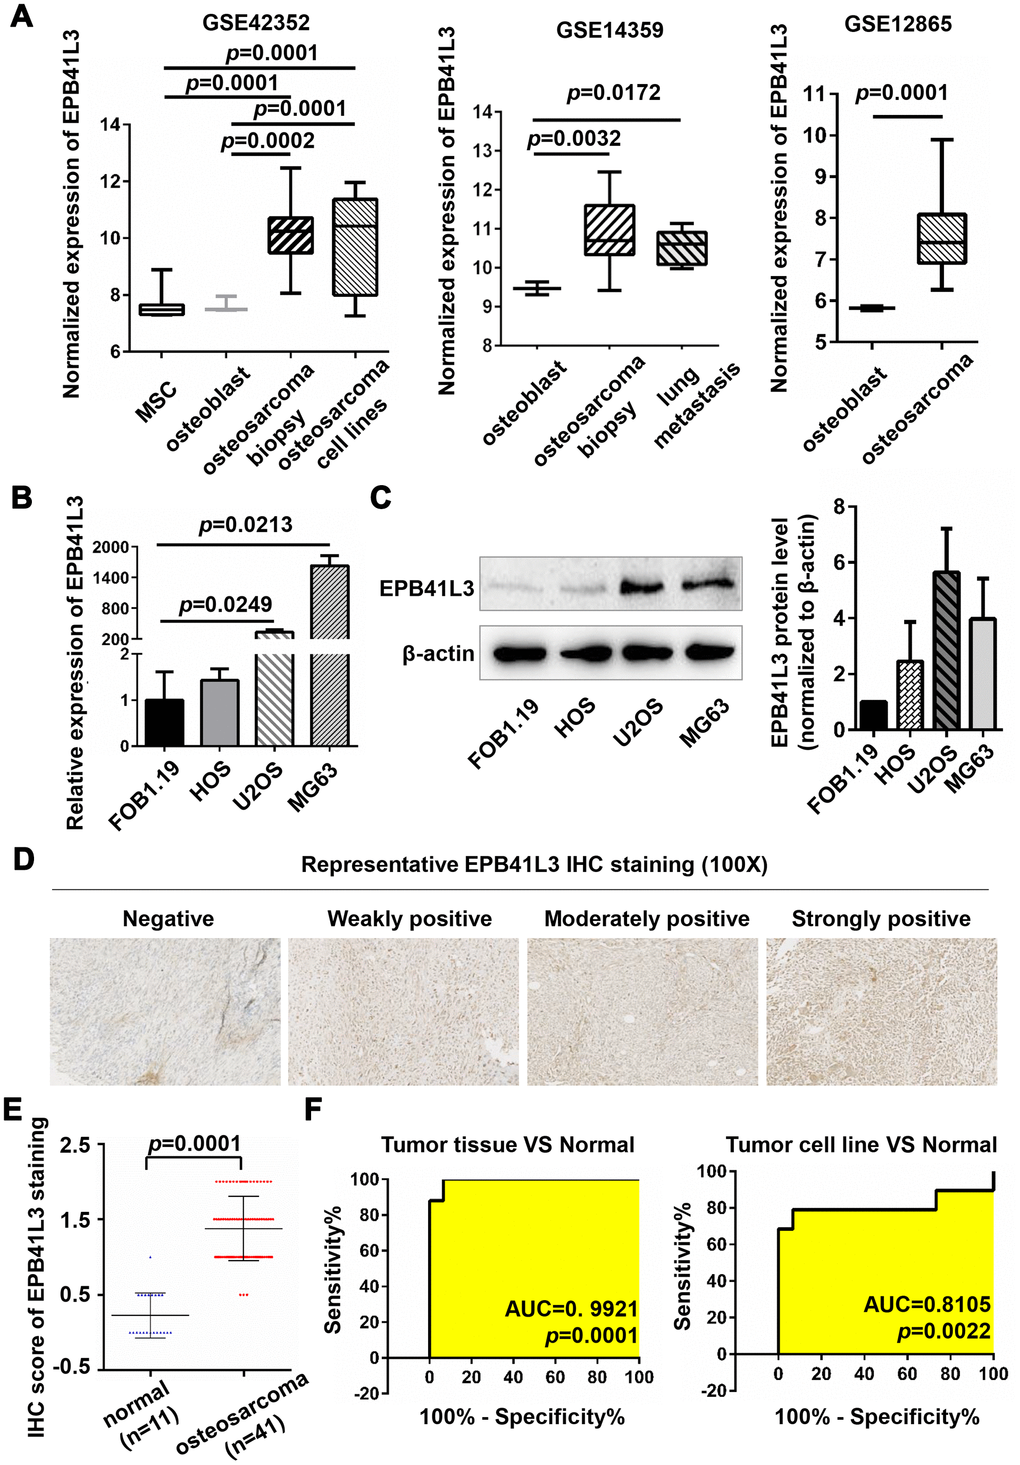 EPB41L3 is up-regulated in osteosarcoma tissues and cell lines. (A) EPB41L3 mRNA expression was significantly higher in osteosarcoma tissues and cell lines than that in normal MSC and osteoblast cells based on data from the Gene Expression Omnibus (GEO accession: GSE42352, GSE14359, and GSE12865). (B) Compared with normal osteoblast cells (hFOB1.19), EPB41L3 mRNA expression was significantly higher in U2OS and MG63 and not obviously up-regulated in HOS as detected by qRT-PCR. GAPDH served as the loading control and was used to normalize the expression data. Data were presented as the mean ± standard error of the mean of two independent experiments. (C) Western blot results showed that EPB41L3 protein expression in U2OS and MG63 but not HOS was significantly higher than that in hFOB1.19 cell. β-actin was used as a loading control and for normalization. Data were presented as the mean ± standard deviation of two independent experiments. (D) IHC staining results of normal bone tissues and osteosarcoma tissues (magnification, x100). (E) IHC total score of EPB41L3 staining was analyzed between normal bone tissues (blue scatter plot, n=11) and osteosarcoma tissues (red scatter plot, n=41). Black solid lines represented the mean ± SD. (F) ROC curves and AUC values for osteosarcoma based on GSE42352. EPB41L3, erythrocyte membrane protein band 4.1-like 3; MSC, mesenchymal stem cell; qRT-PCR, quantitative reverse transcription polymerase chain reaction; GAPDH, glyceraldehyde-3-phosphate dehydrogenase; IHC, immunohistochemistry; ROC, receiver operating characteristic; AUC, area under curve.